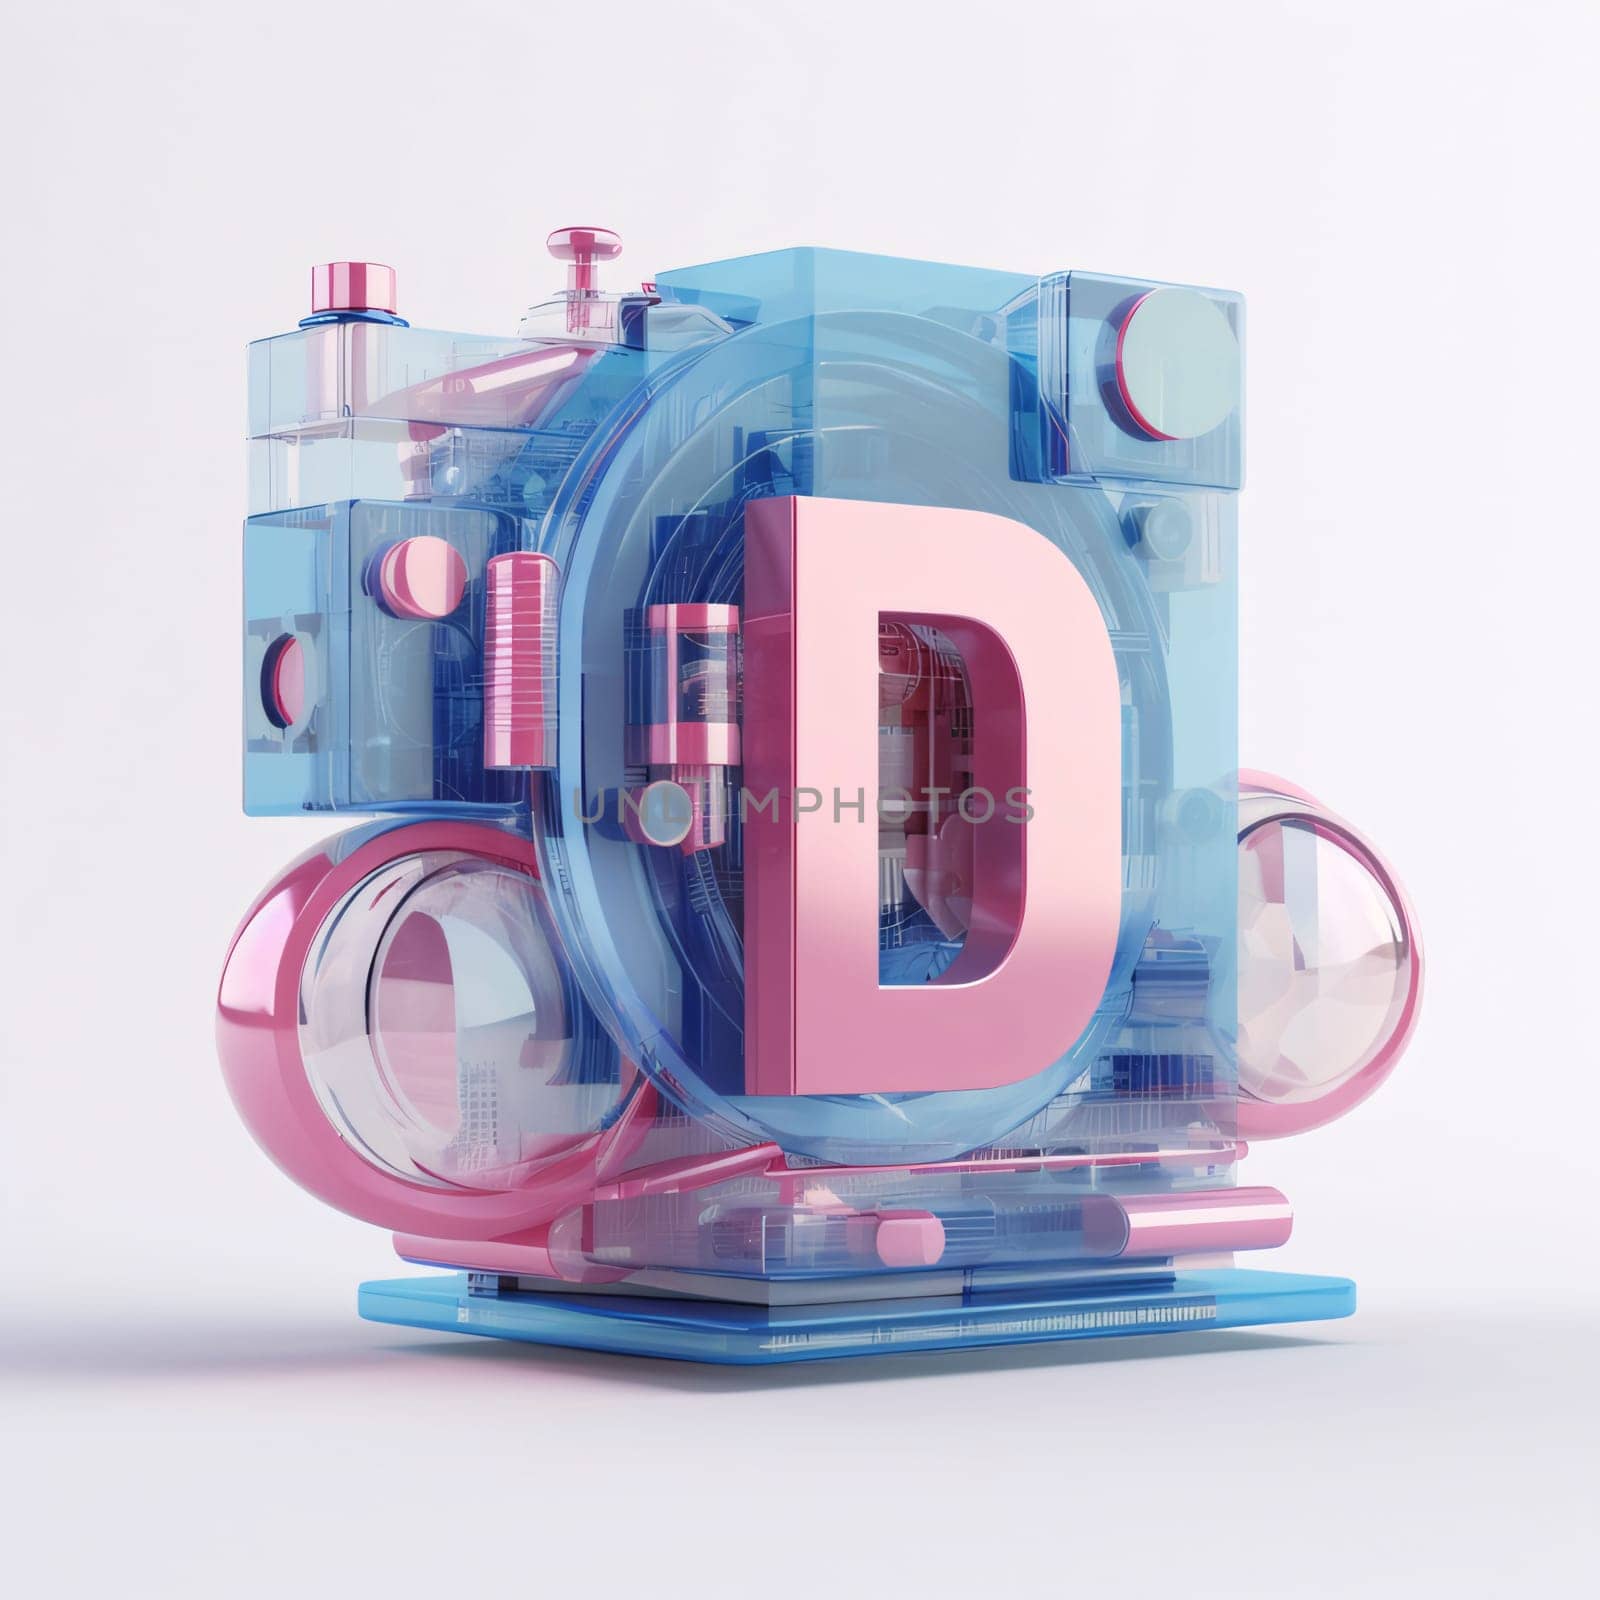 Graphic alphabet letters: Futuristic 3D rendering of the letter D in the form of a water cooler